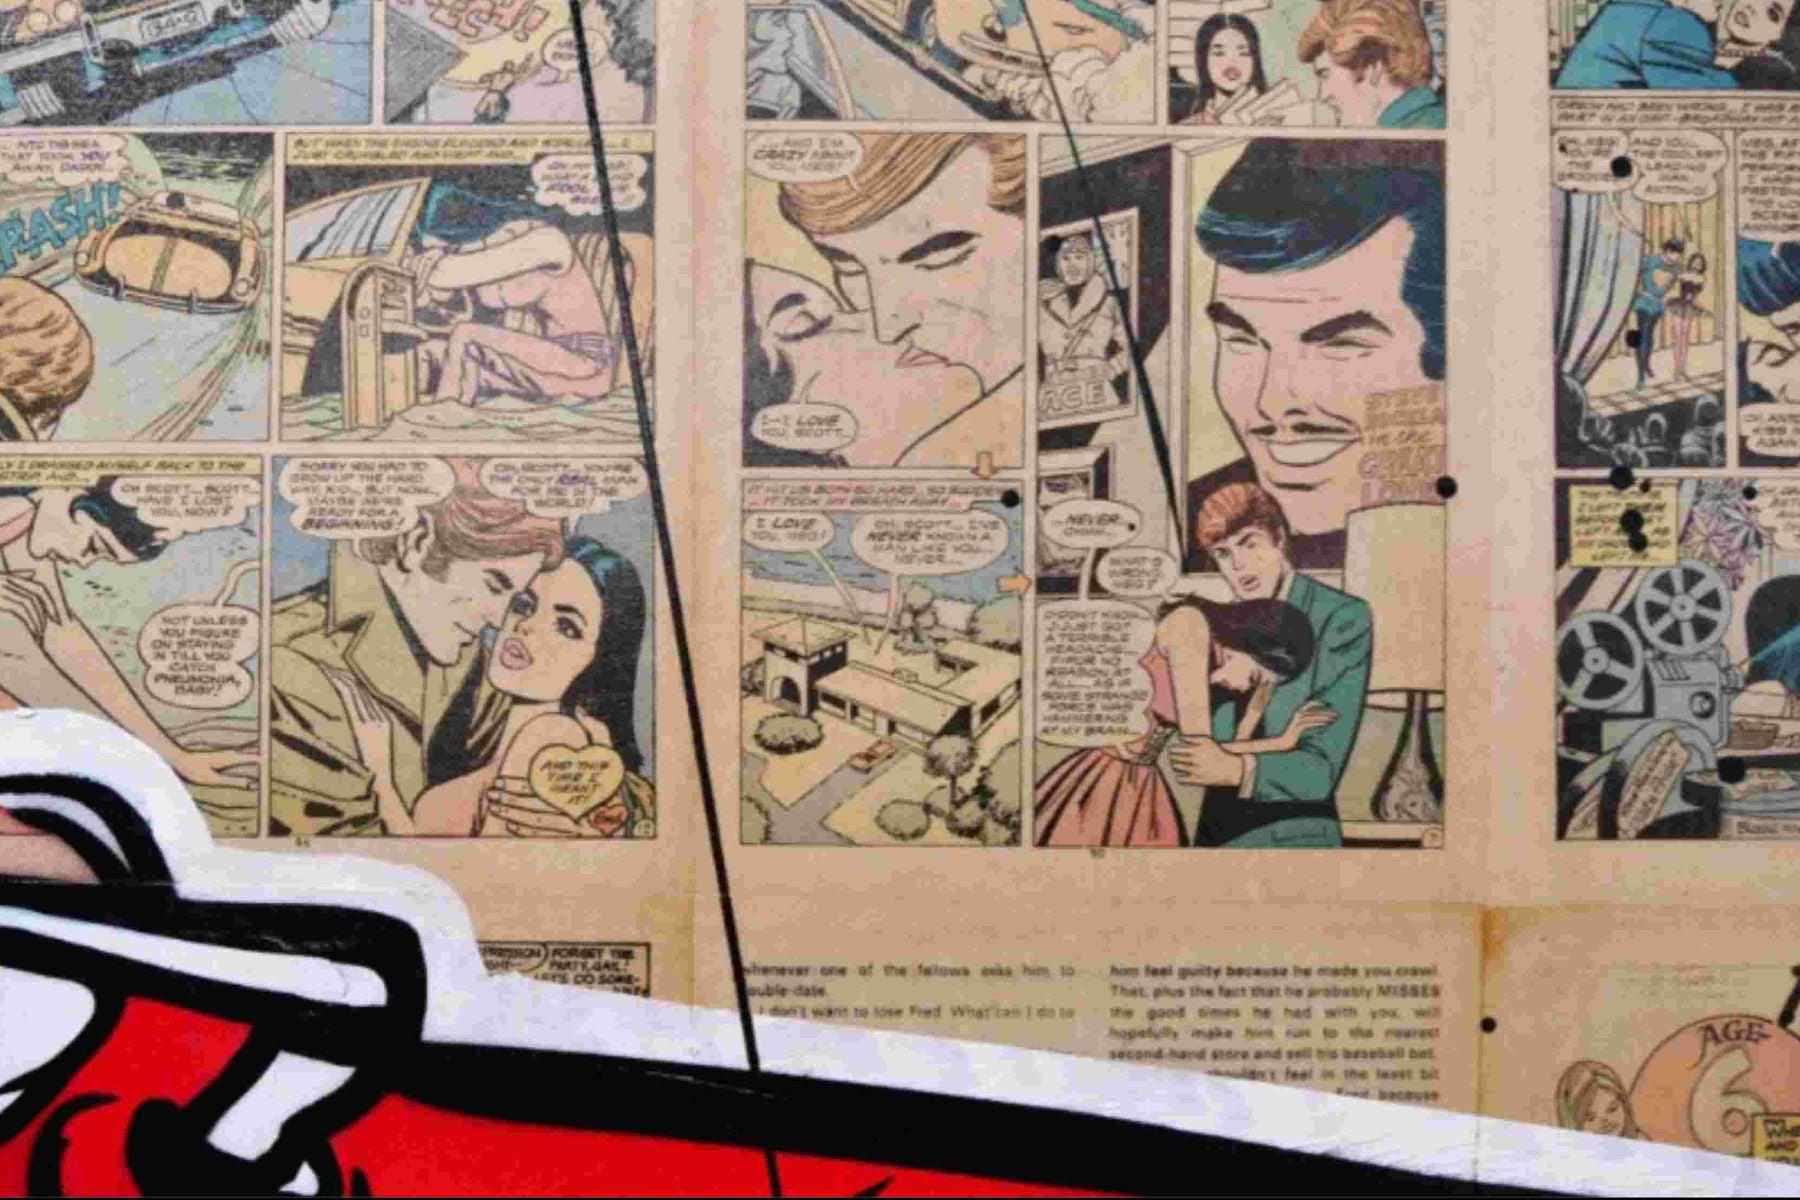 Drive By Romance 180cm x 100cm Porsche Comic Book Pages Urban Pop Art Painting With Custom Etched Frame (SOLD)